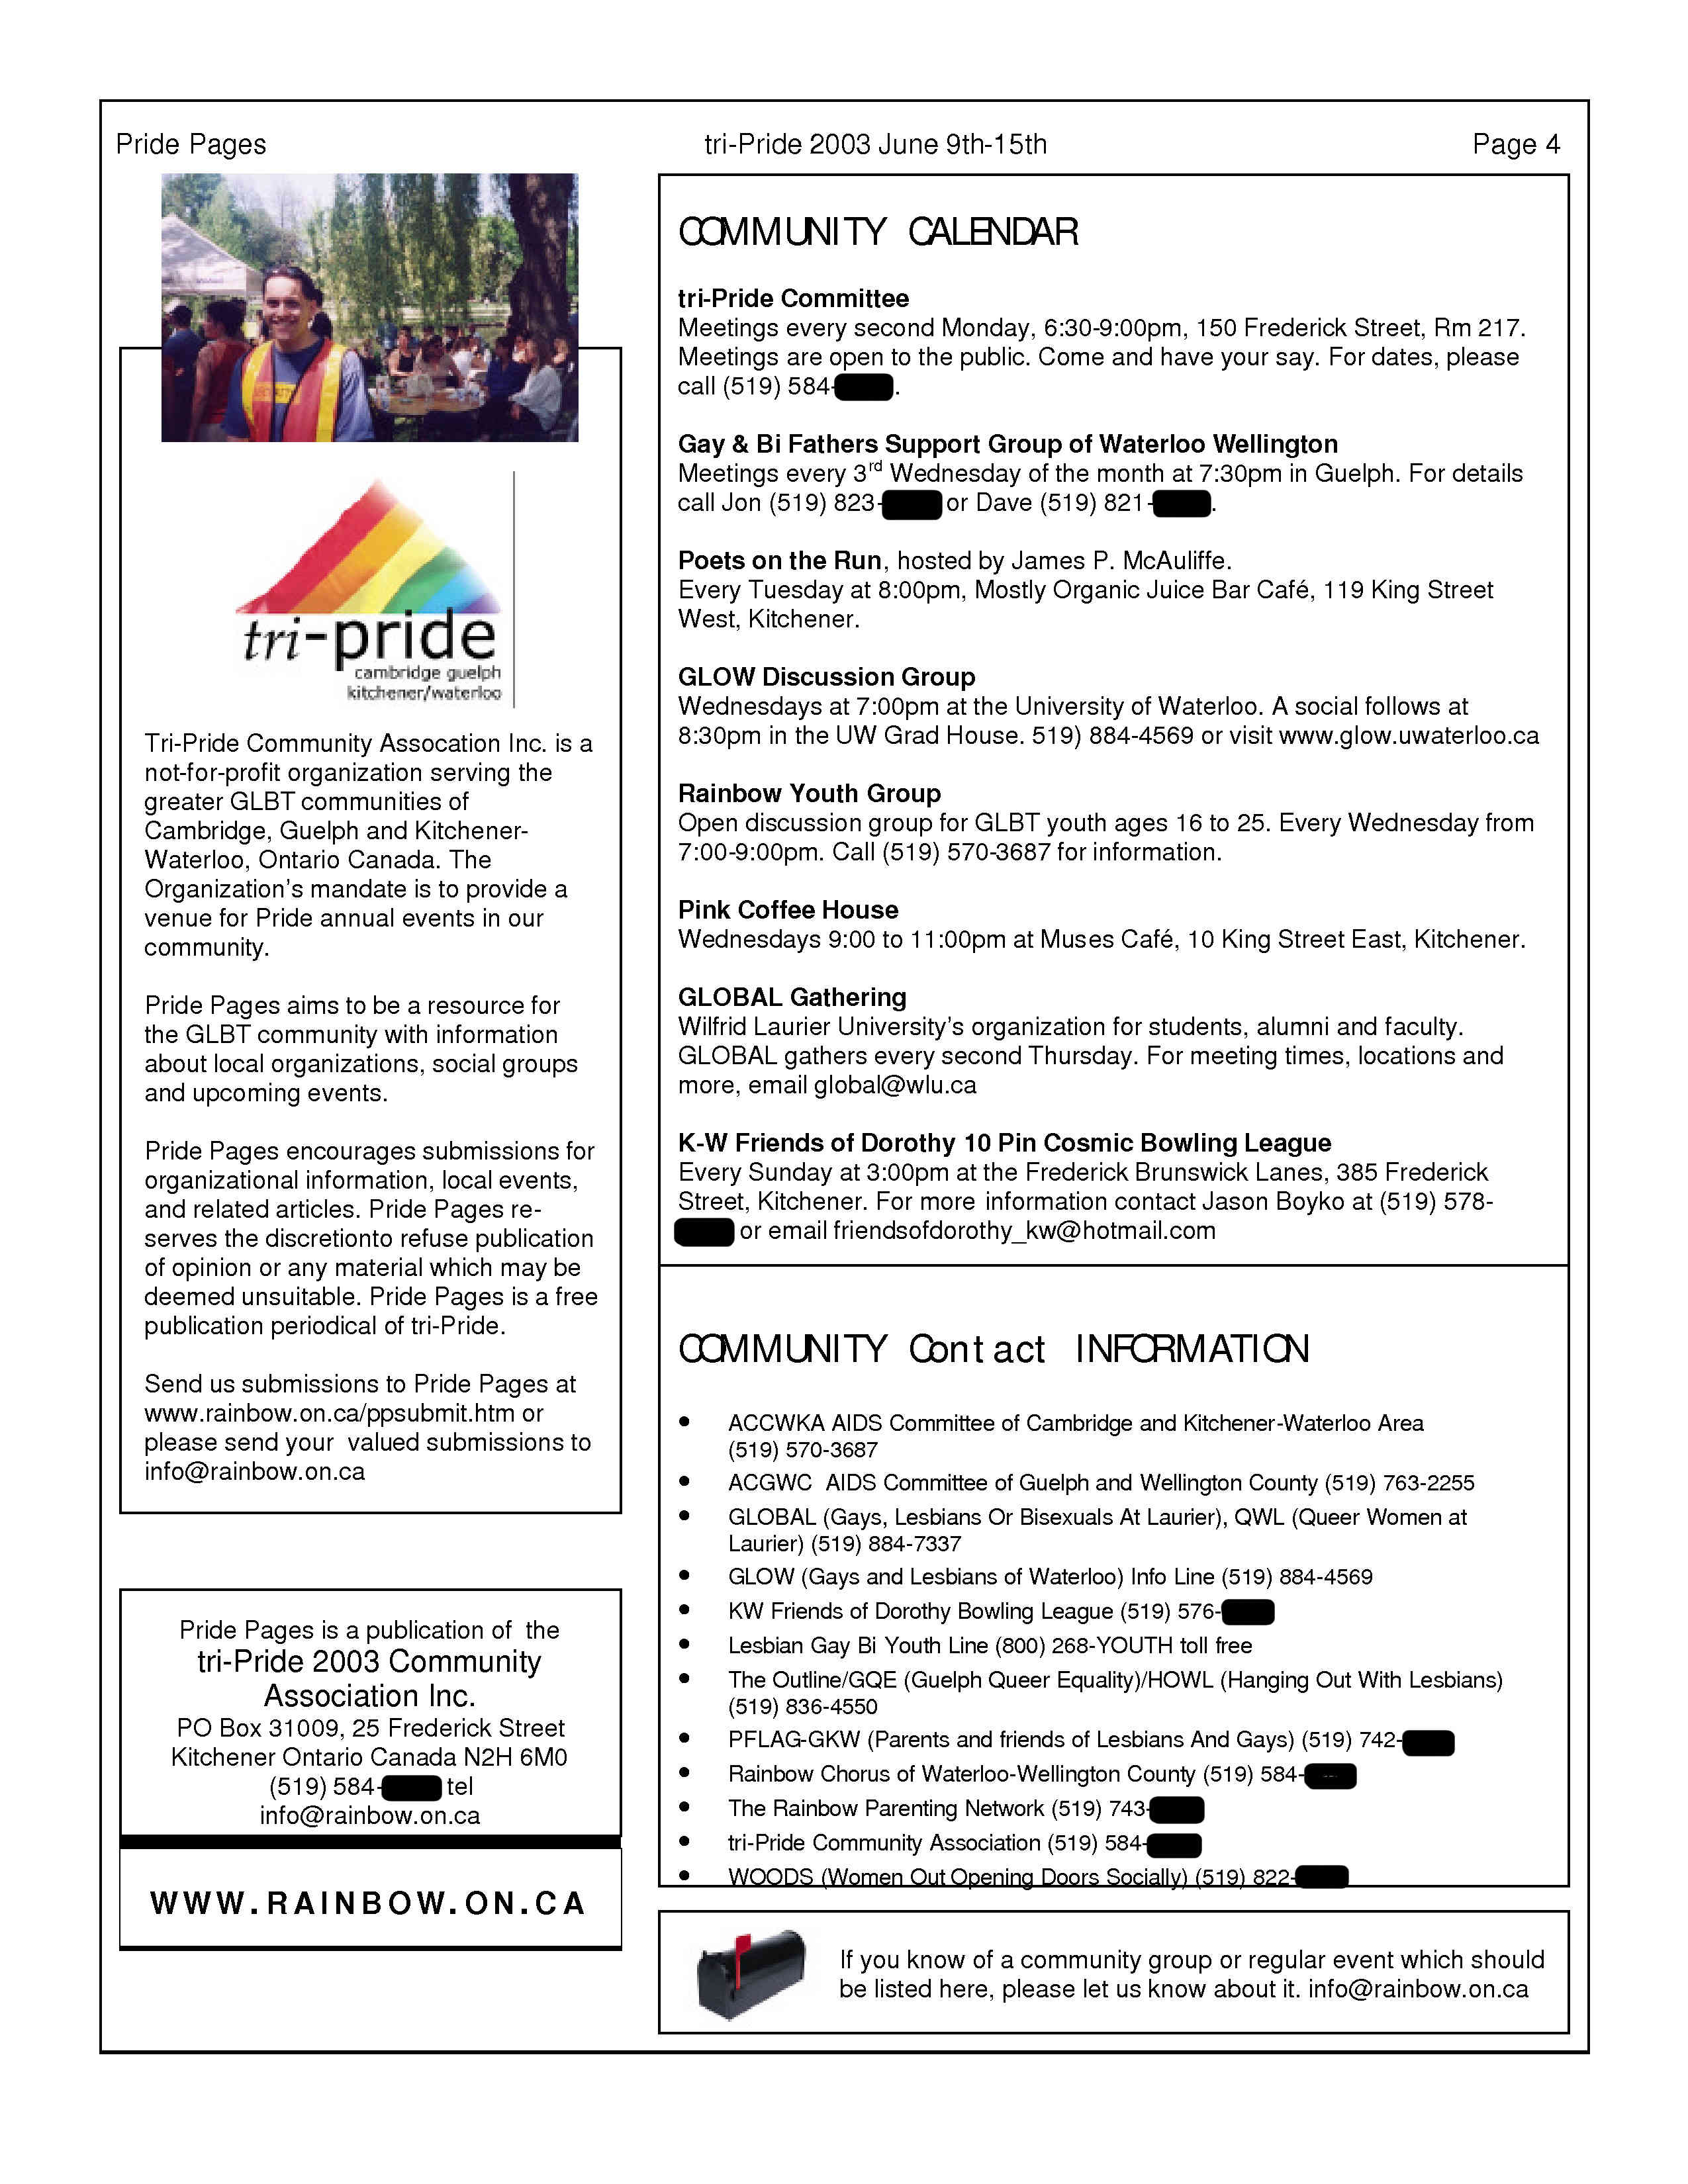 Pride Pages 2003-03 p4